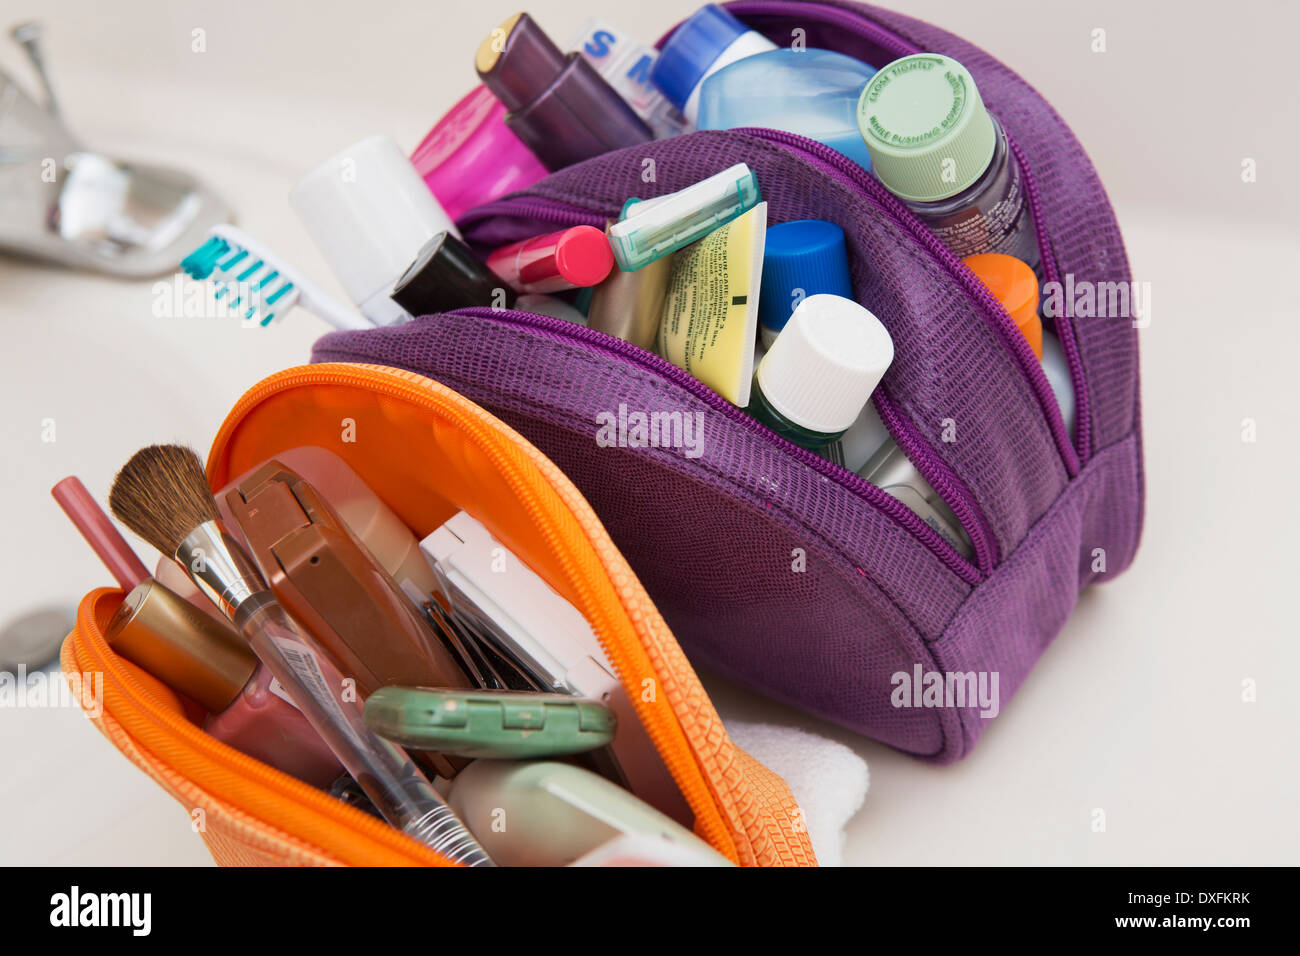 Women's toiletry, cosmetic travel bag on bathroom counter, filled with  toothbrush, lotion, makeup and other beauty products, USA Stock Photo -  Alamy